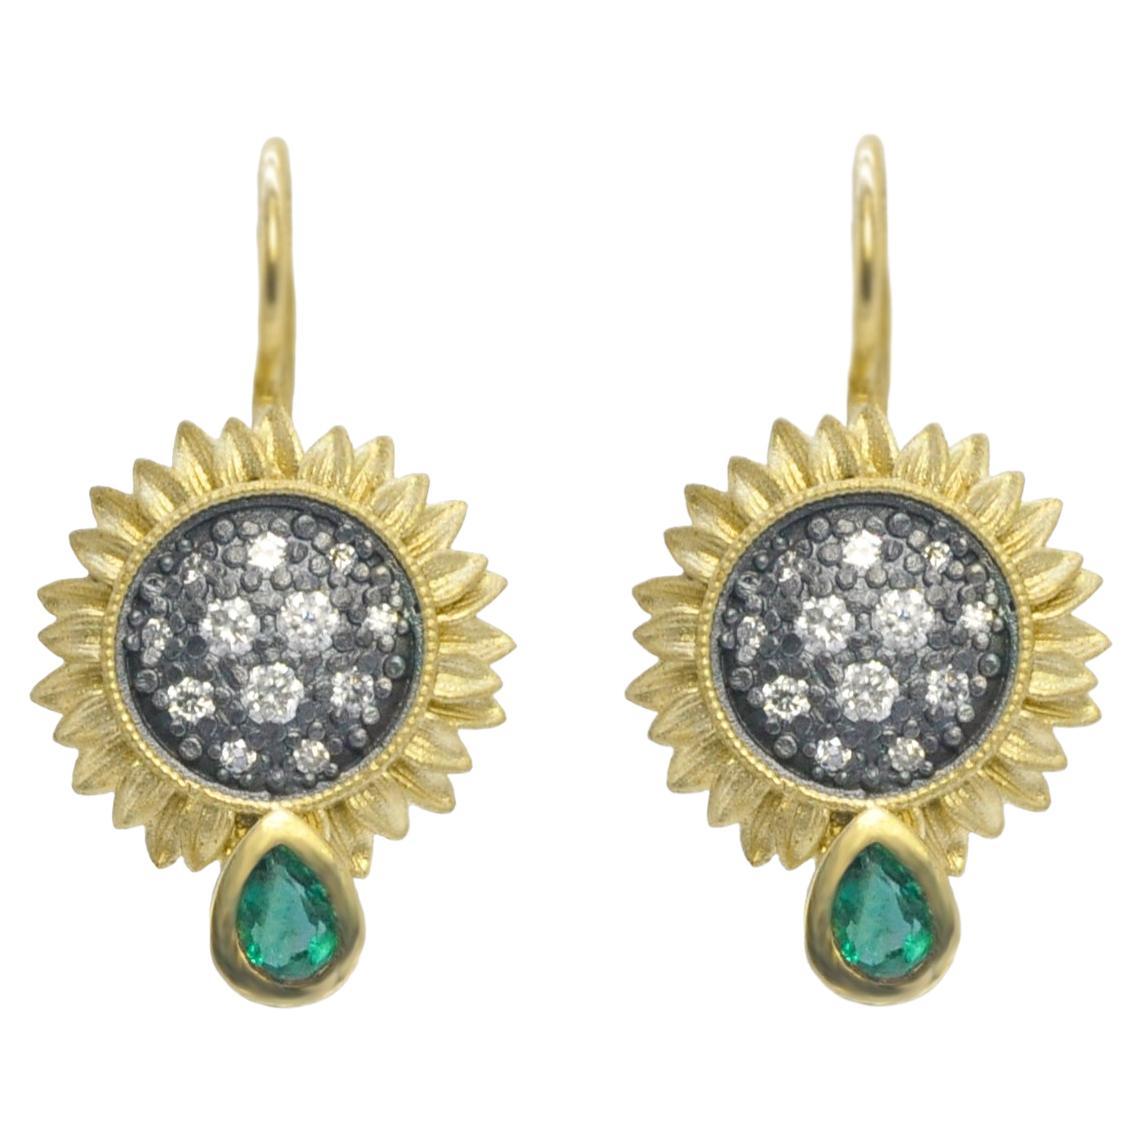 Sunflower Earrings with Pave Set Diamond in Oxidized Silver with Emeralds, Small For Sale